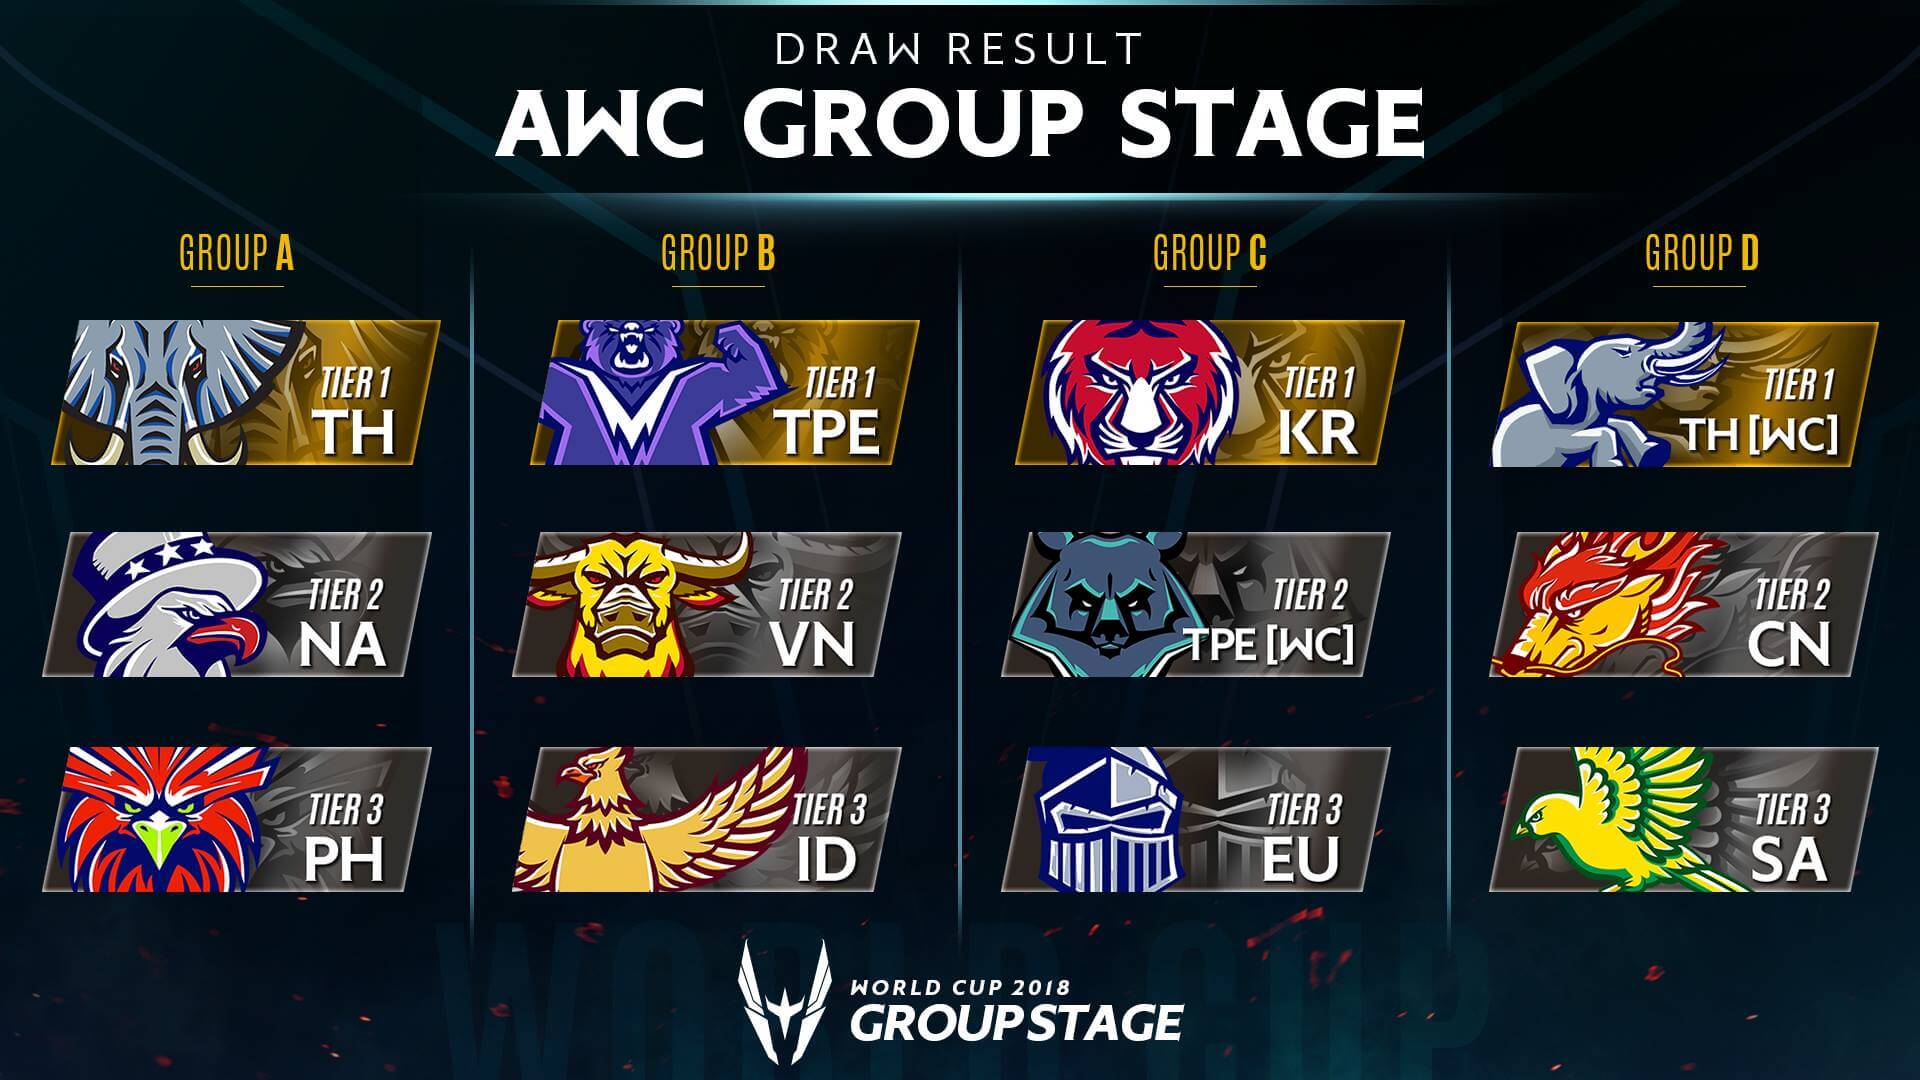 2018 AWC Group Stage Draw Result